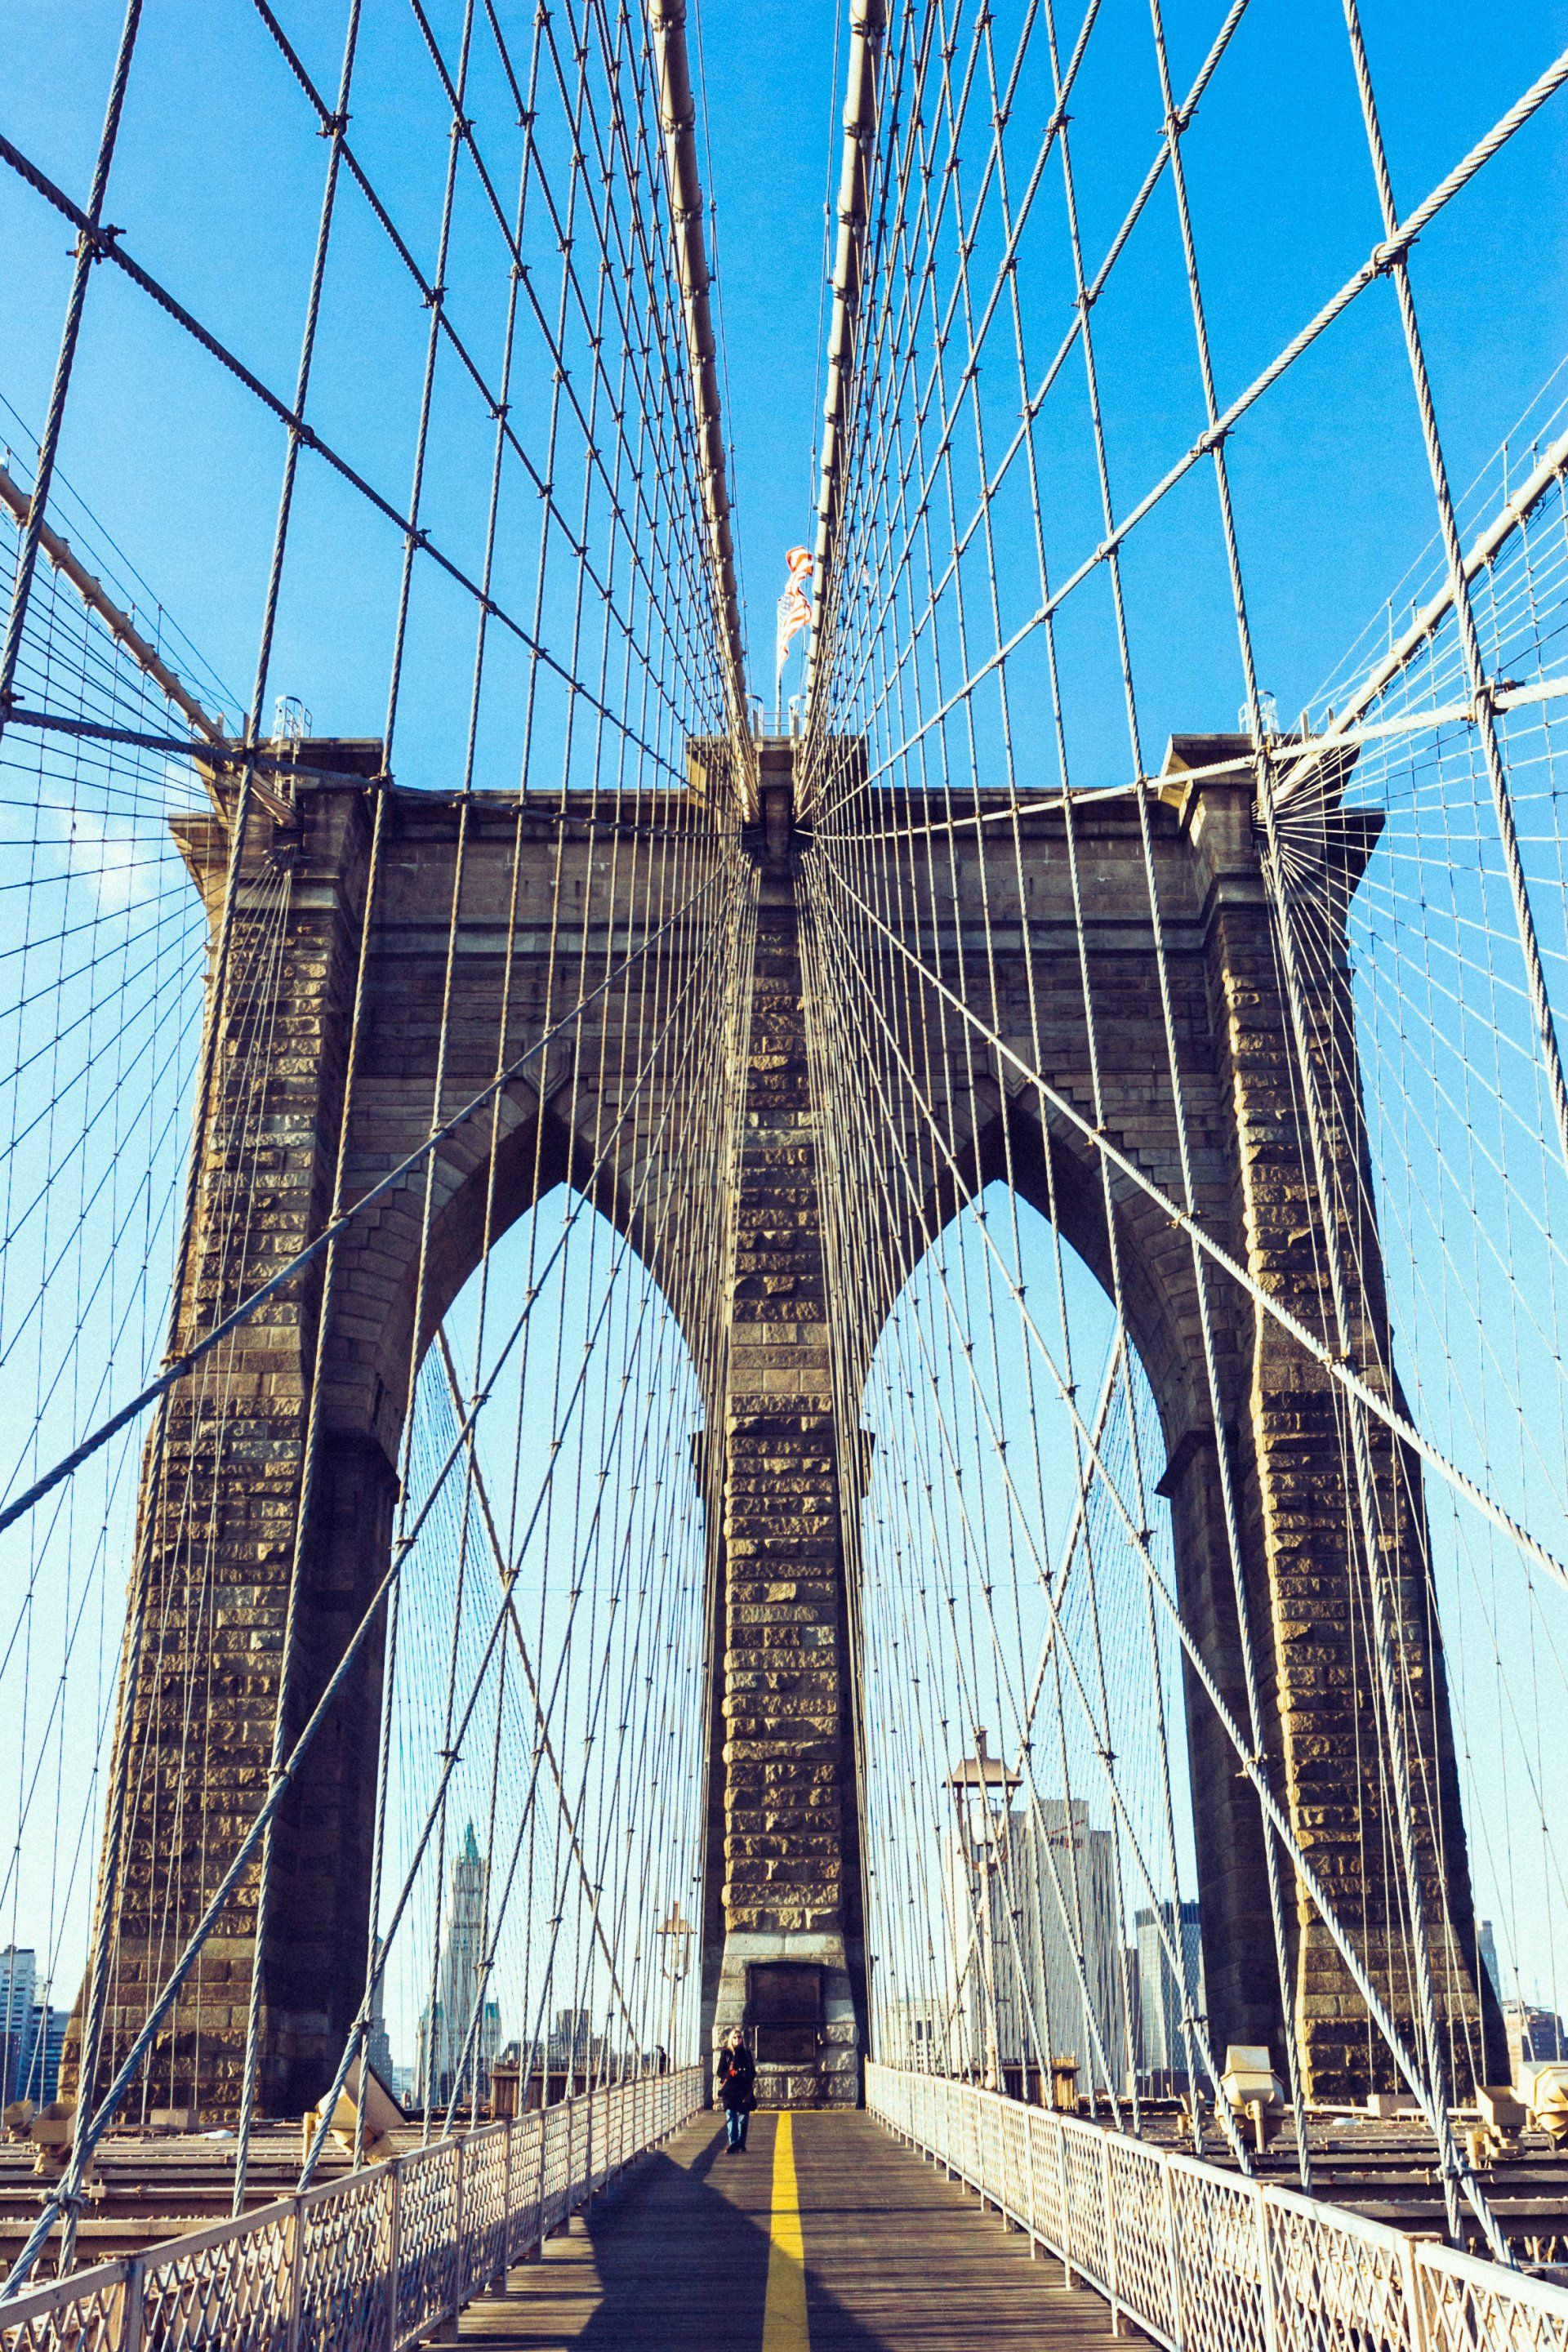 Looking up at the brooklyn bridge in new york city